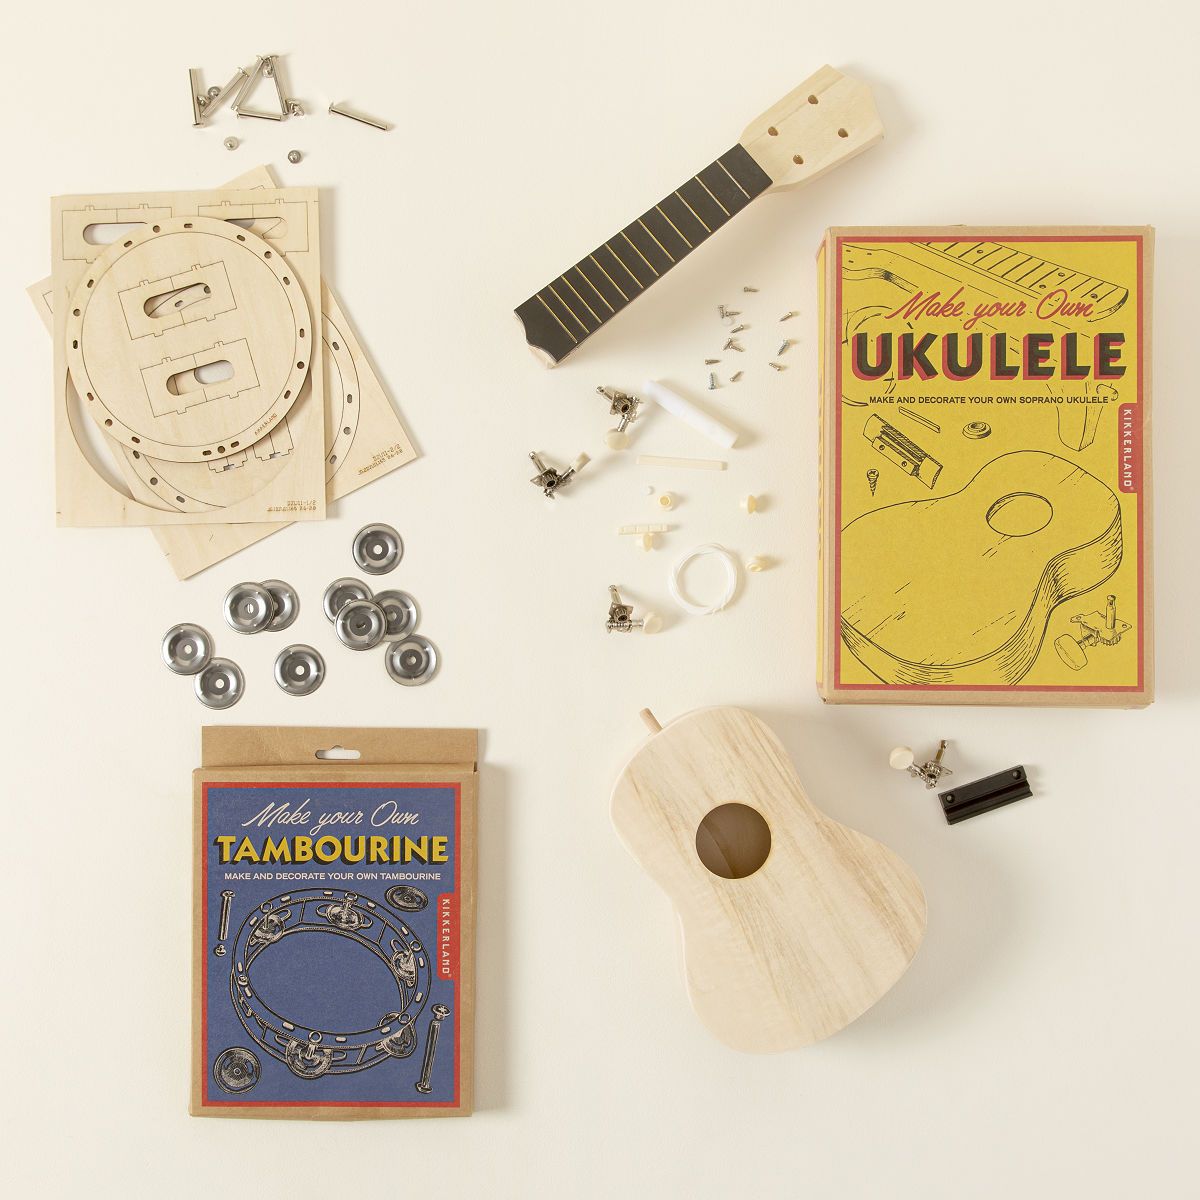 Make Your Own Folk Instruments | UncommonGoods